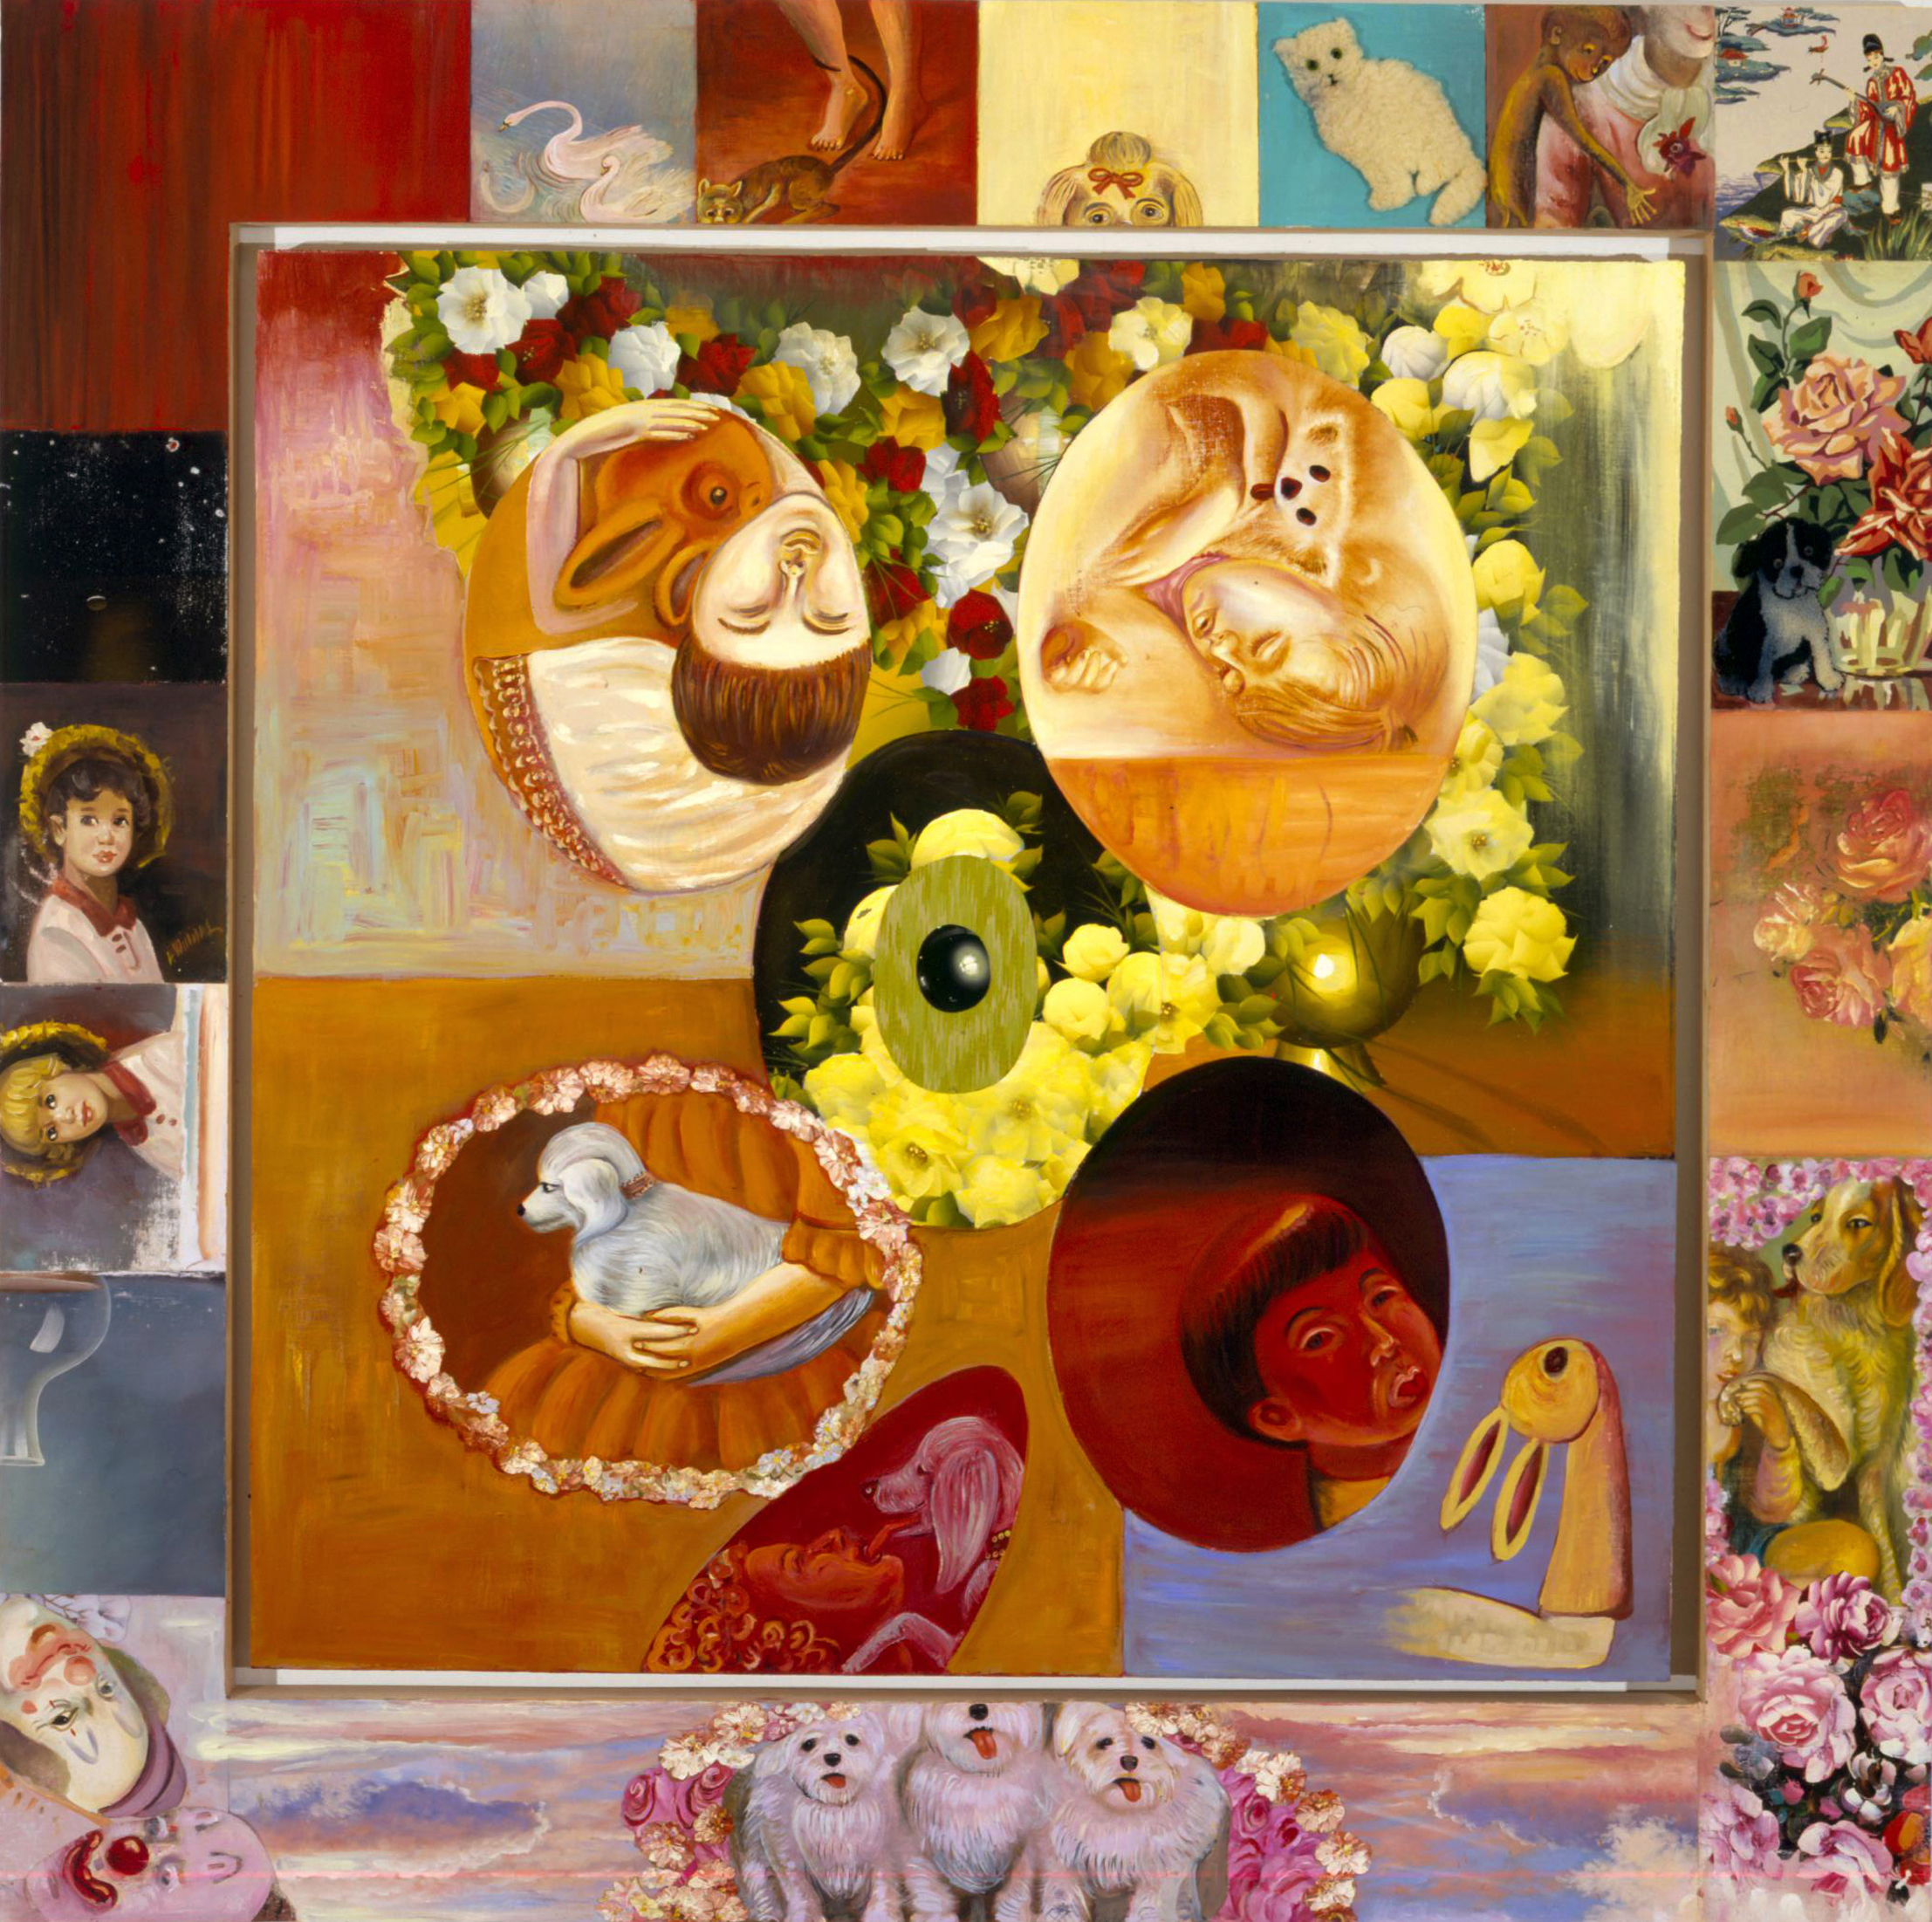 Ilicit Joinings, 68" × 68", oil and collage on canvas, 1994